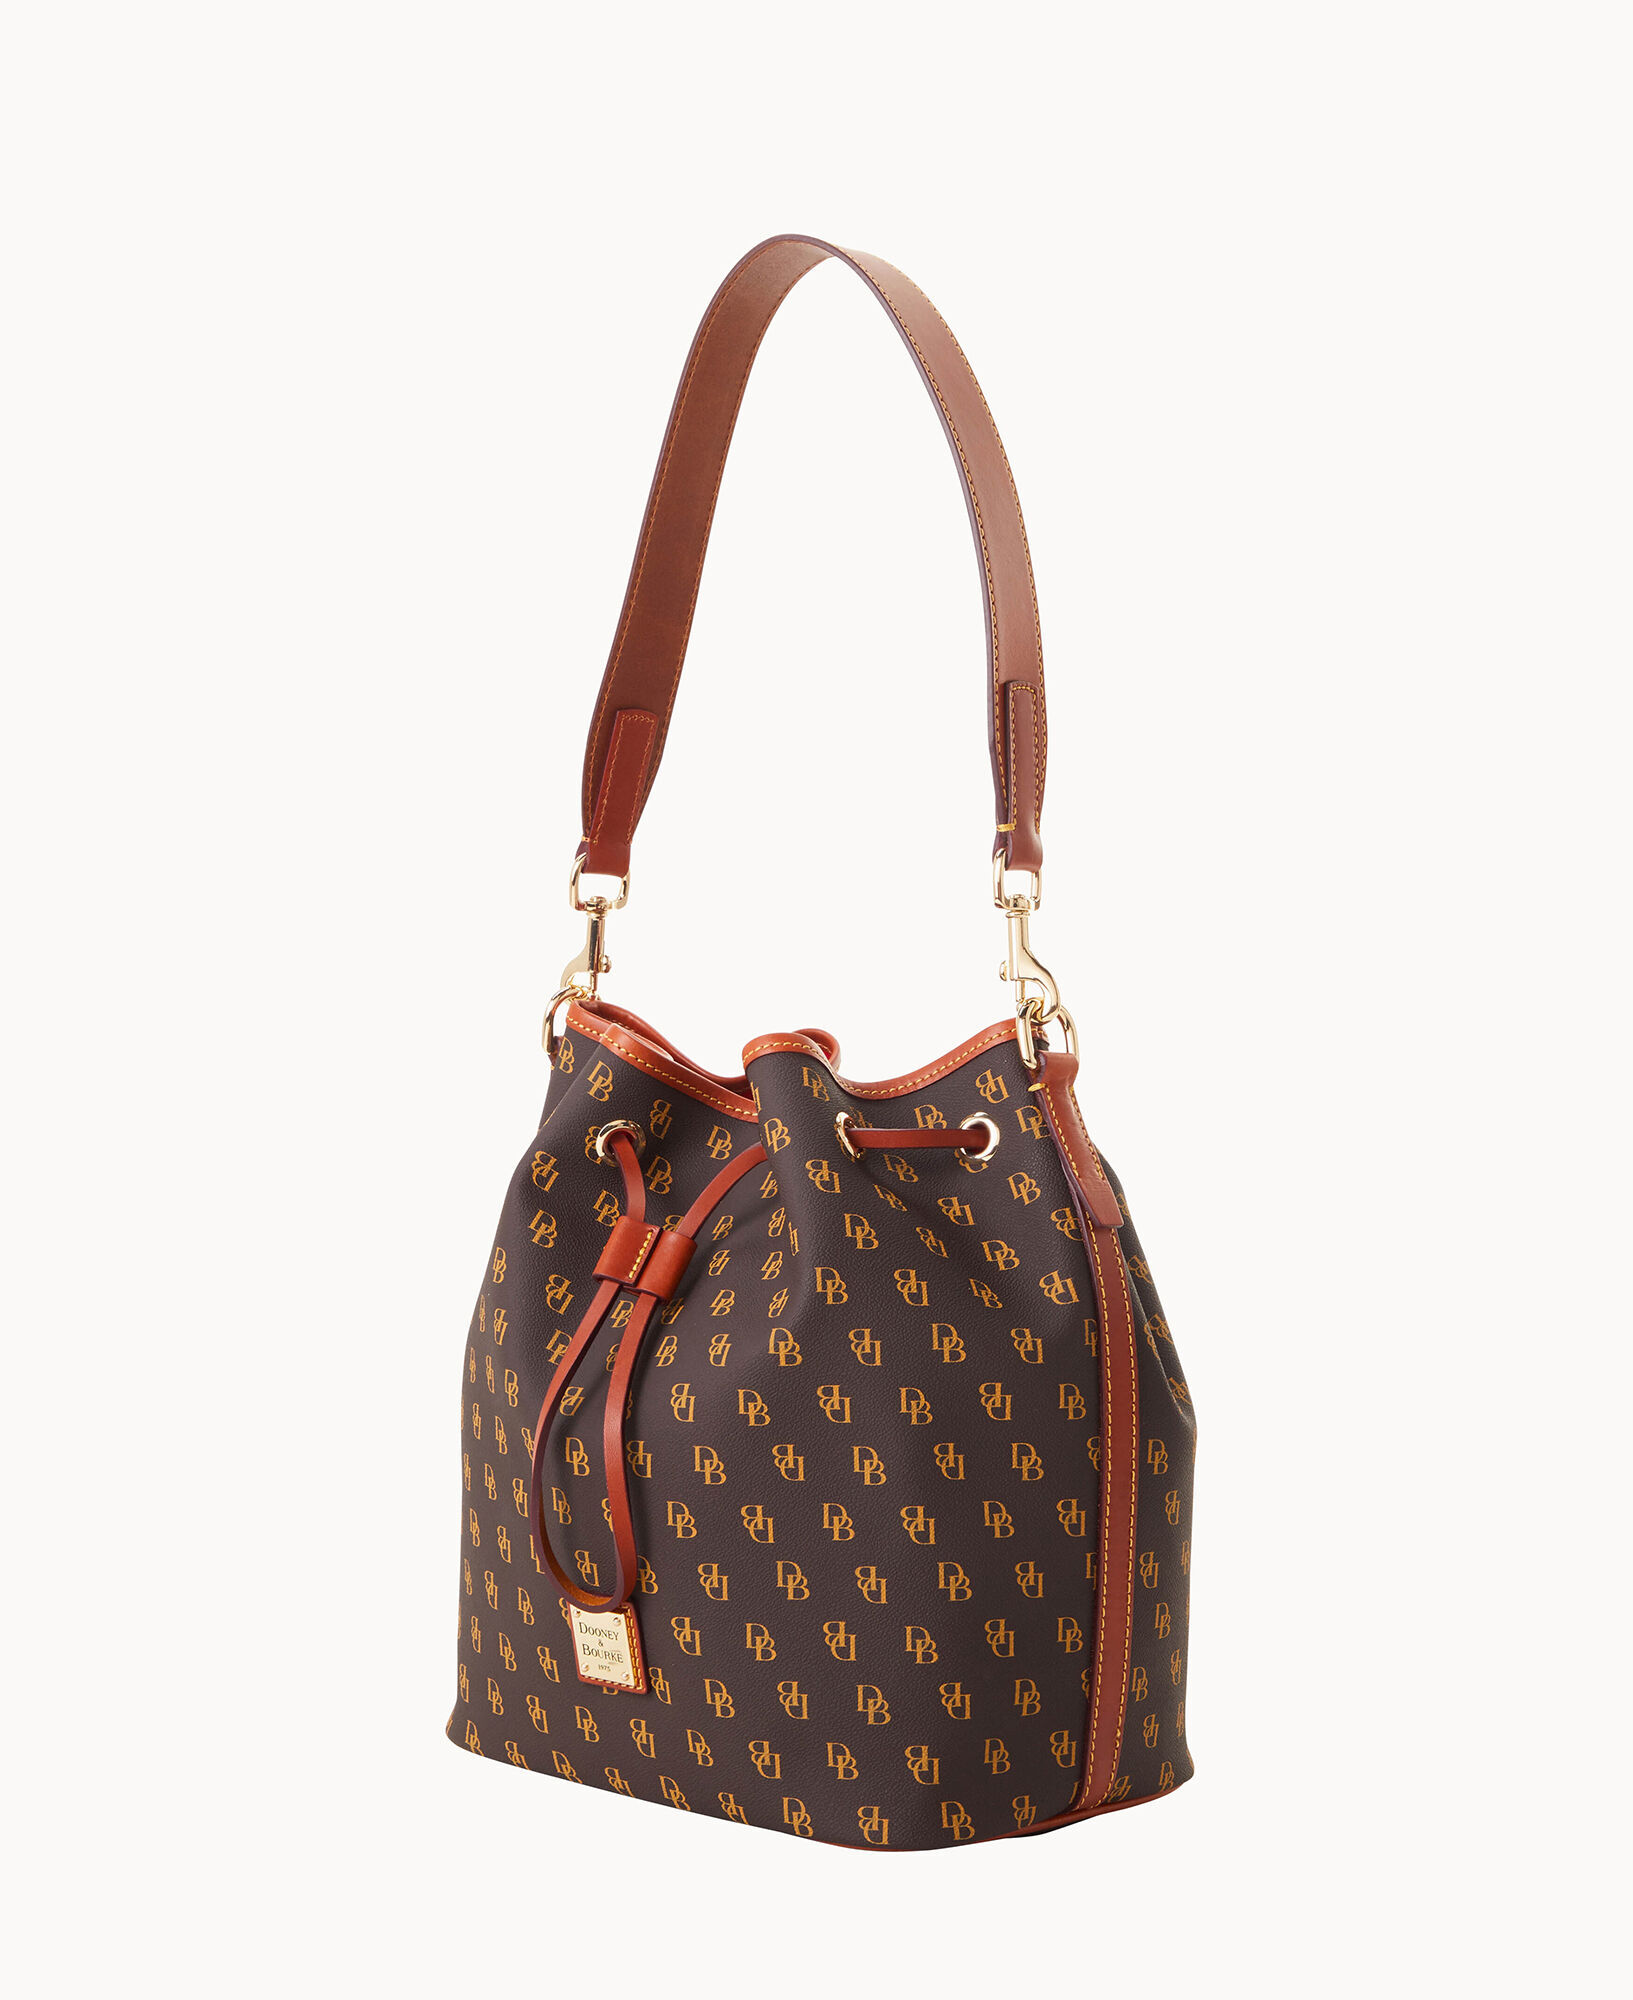 Dooney And Bourke Philippines - Outlet Sale Dooney And Bourke Bags